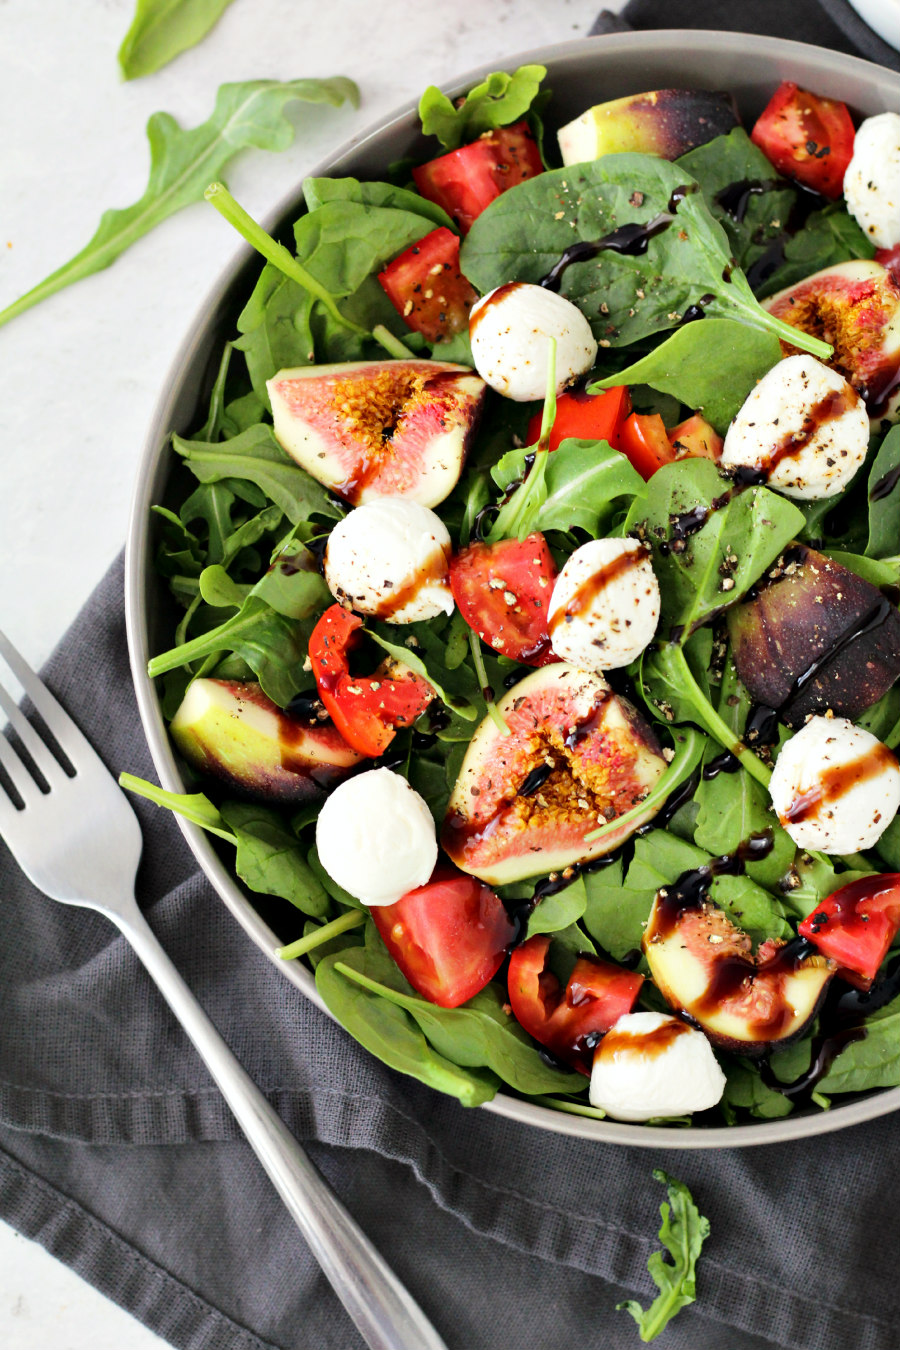 Partial top view of Trader Joe's Inspired Black Fig and Balsamic Salad with fork and baby arugula leaves in photo.